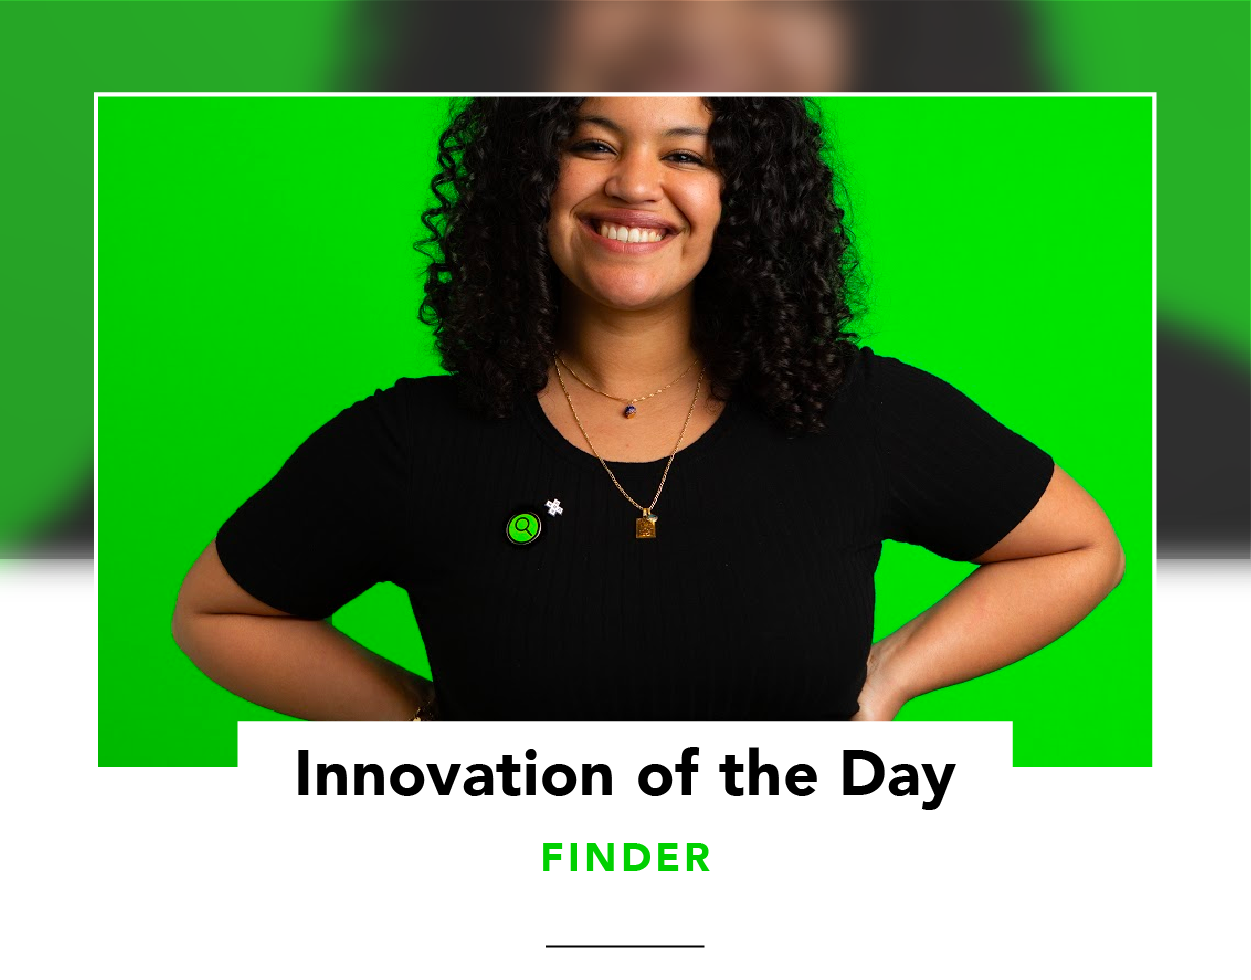 Woman with curly hair wearing a bright green pin on a black shirt